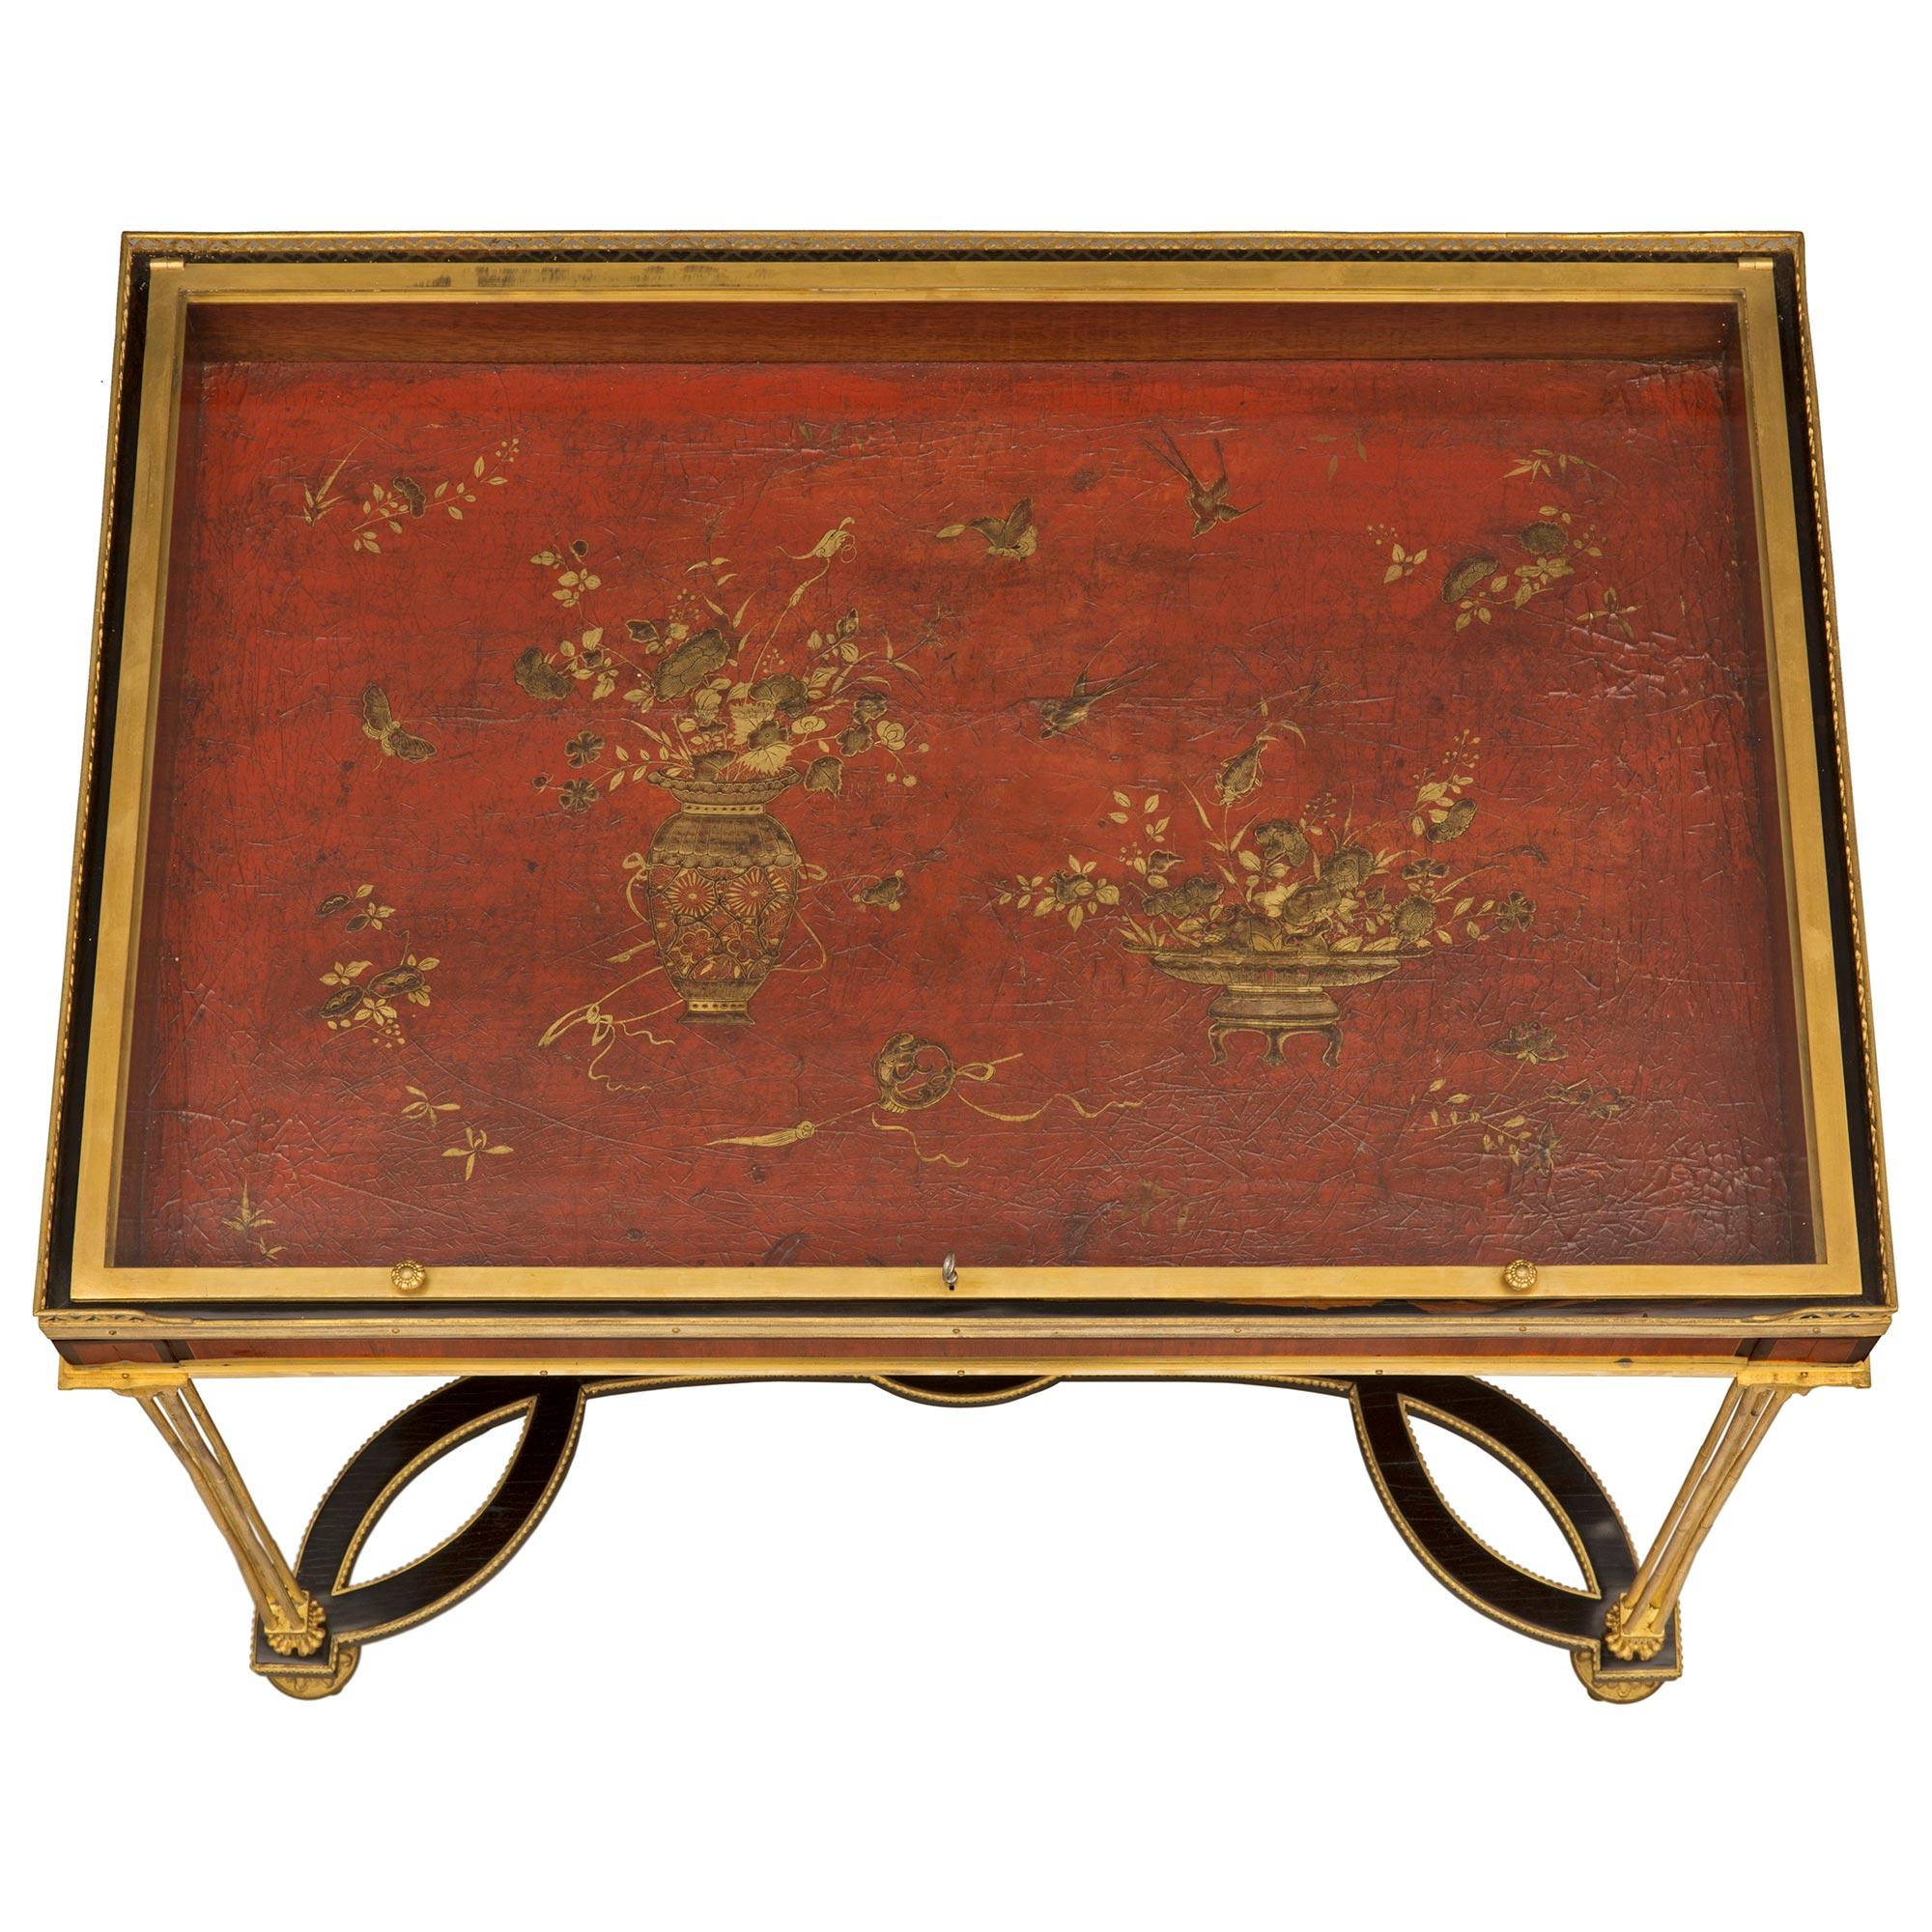 A spectacular and extremely high quality French mid 19th century Louis XVI st. Ebony, Kingwood, ormolu, and Japanese lacquer display table, after a model by Adam Weisweiler and attributed to Henry Dasson. The table is raised by most elegant topie